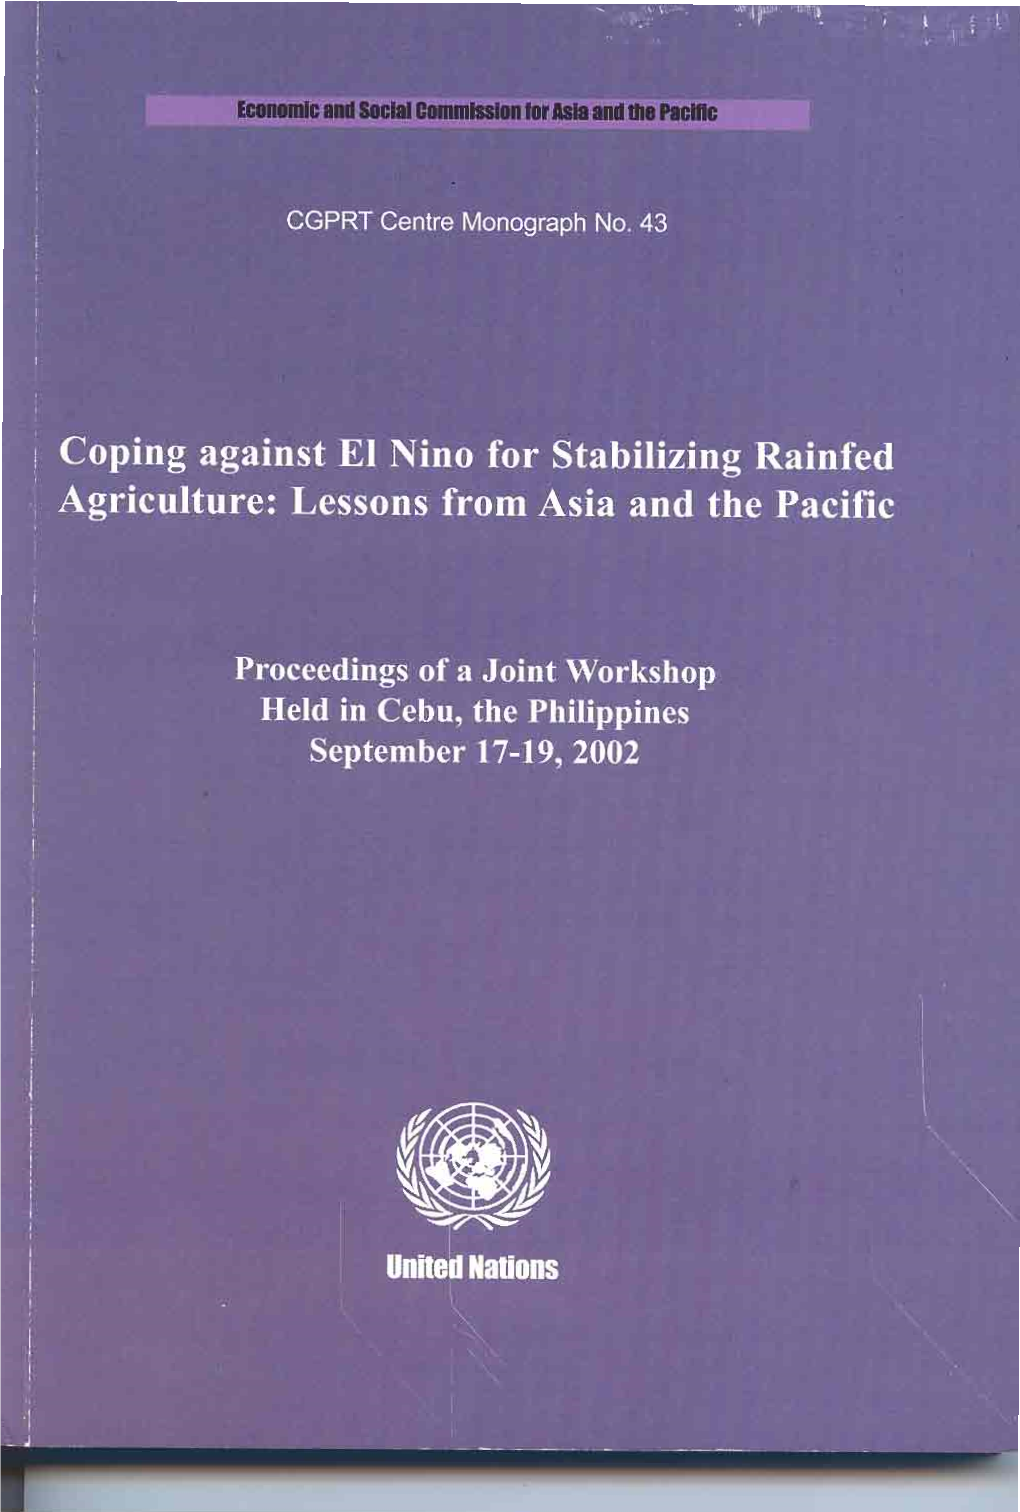 Coping Against El Nino for Stabilizing Rainfed Agriculture: Lessons from Asia and the Pacific